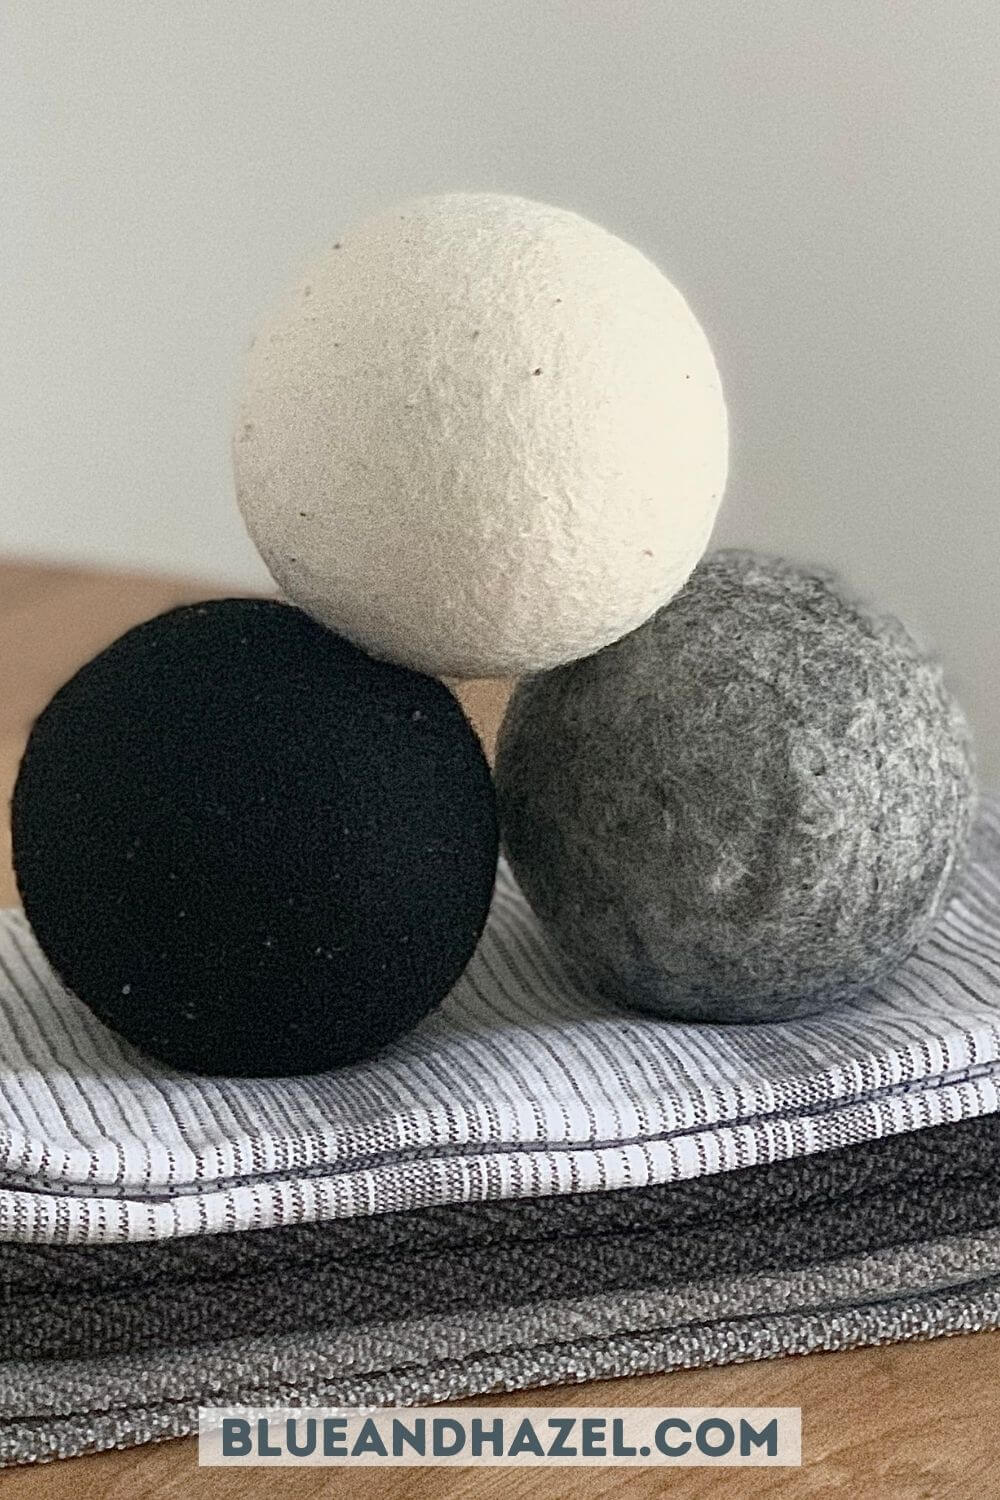 Set of 3 wool dryer balls from Dropps, including a black, white, and gray ball sitting on a stack of hand towels. 